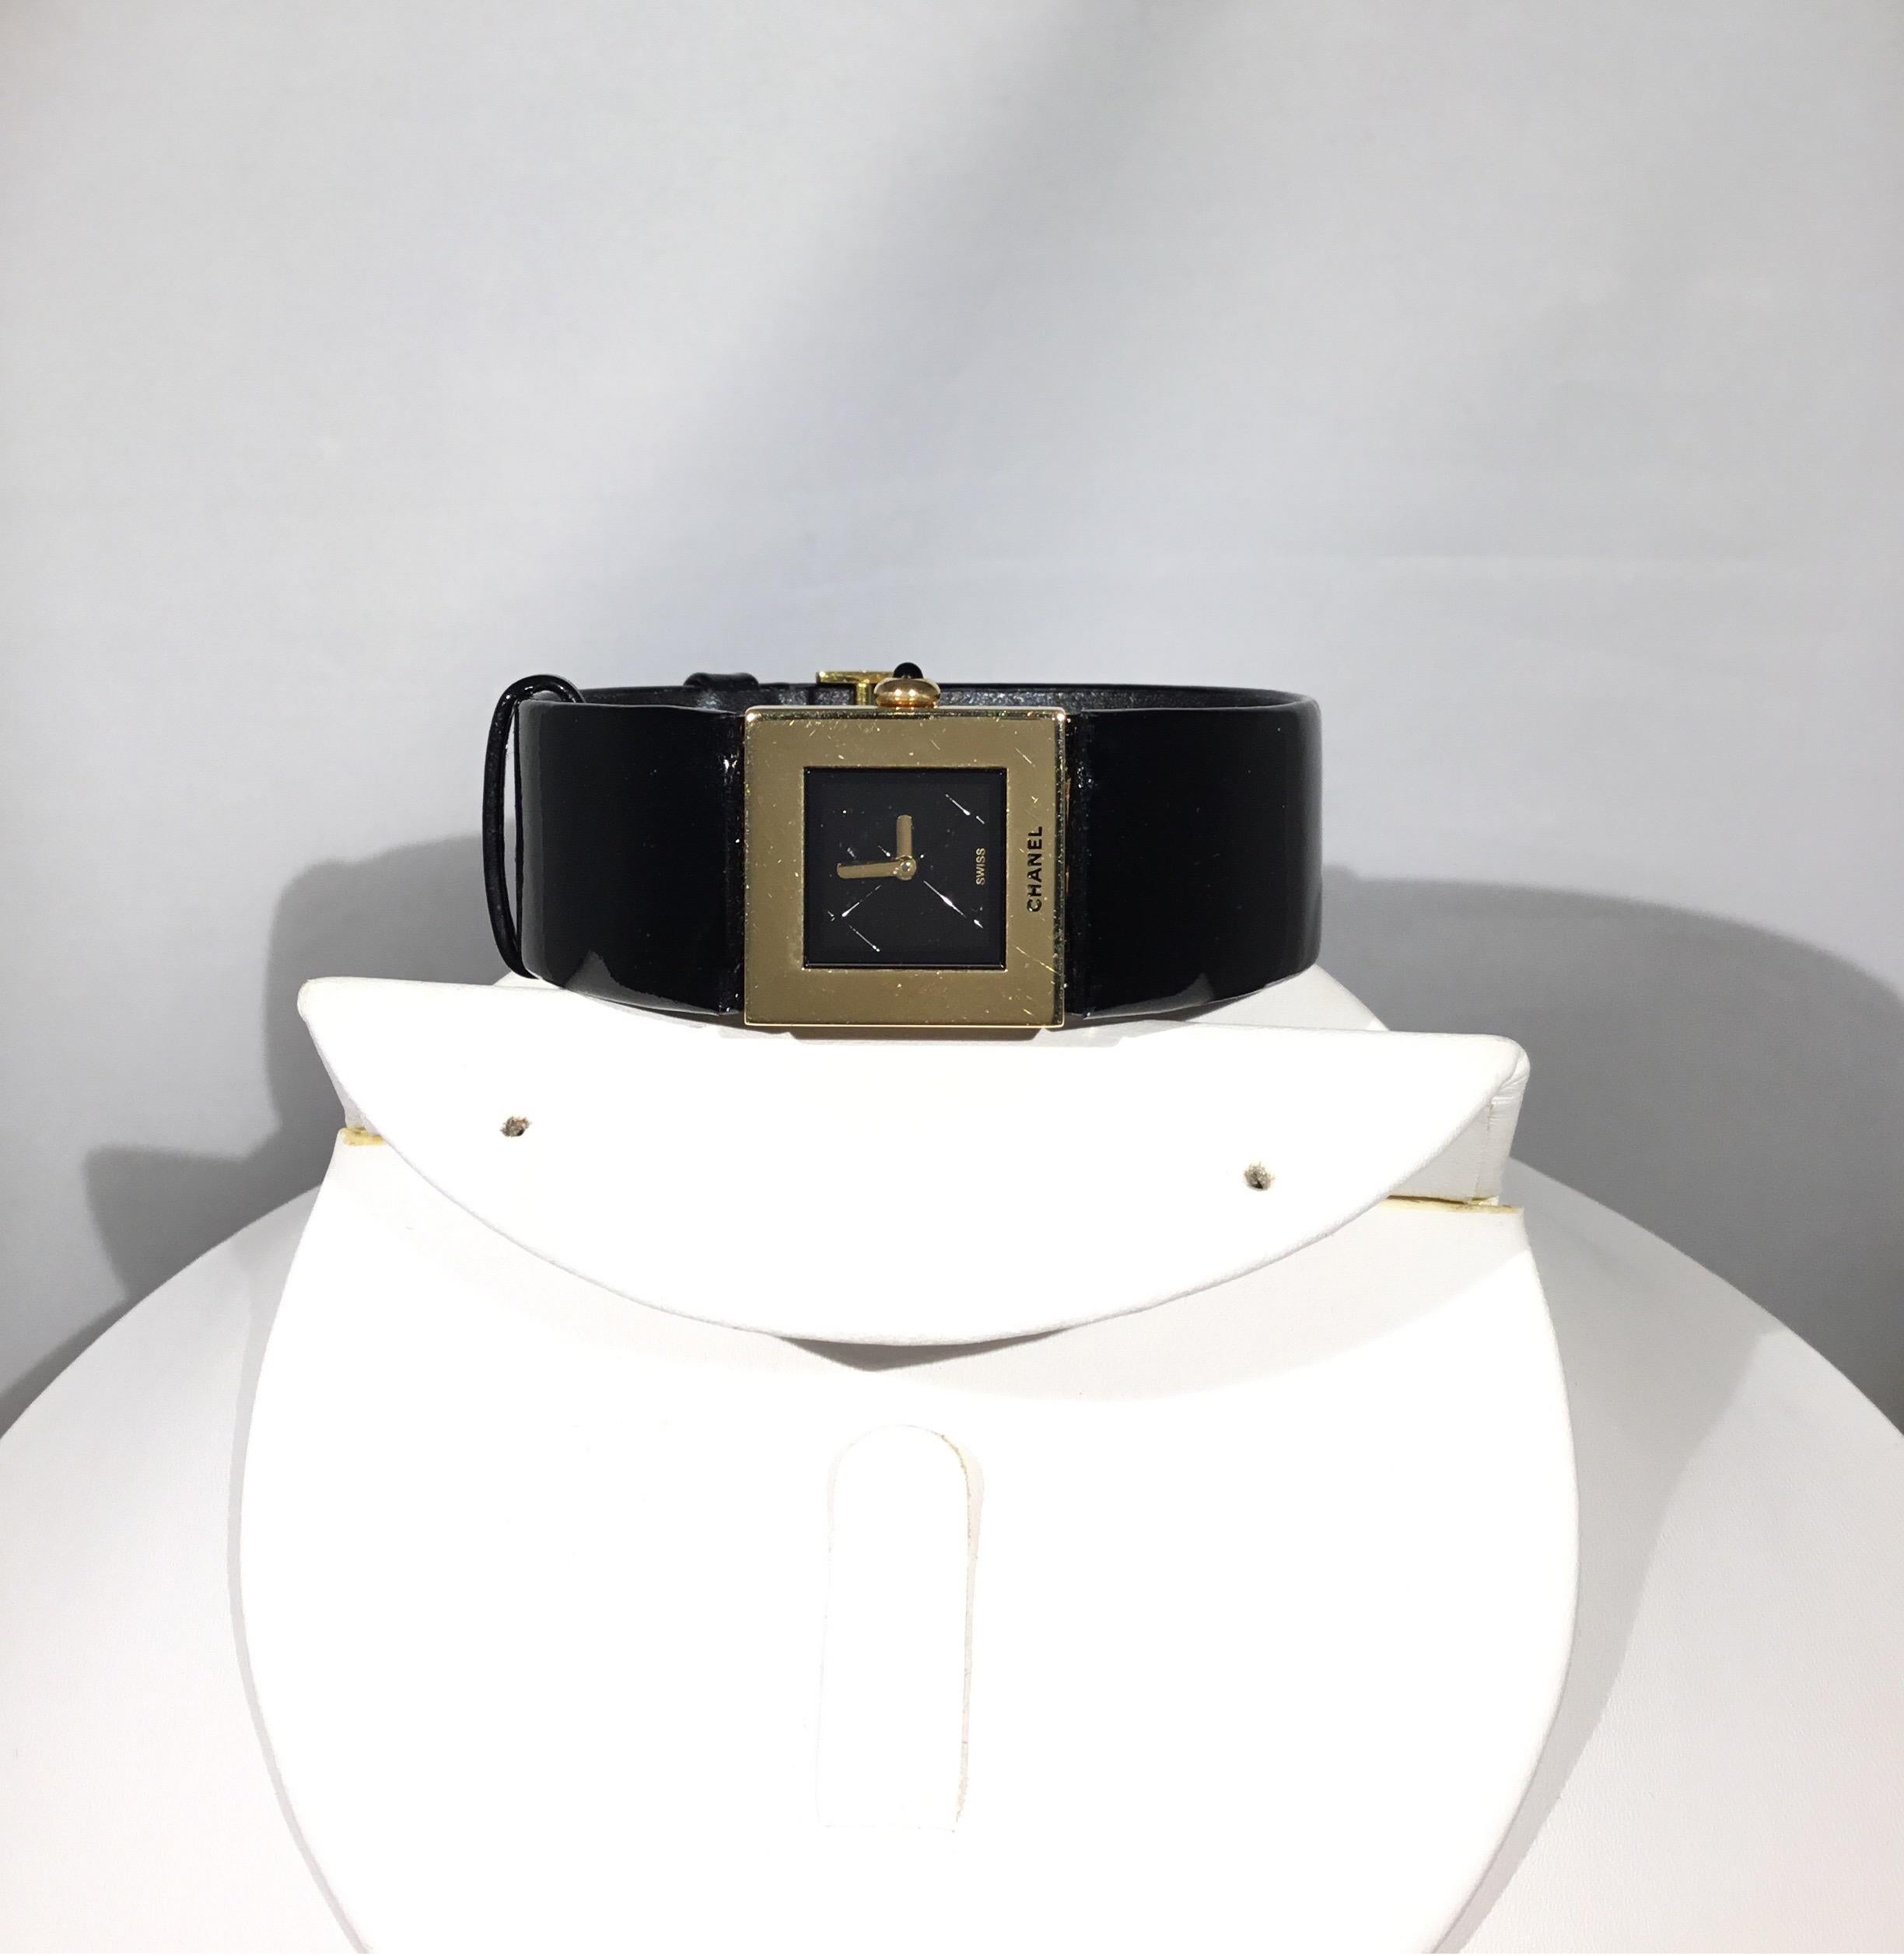 Chanel Matelassé watch in solid 18 K gold with a black patent leather adjustable band, Black quilted quartz dial. crown set with a black sapphire cabochon. Black patent leather bracelet (shows signs of use on the back), folding clasp in gold signed